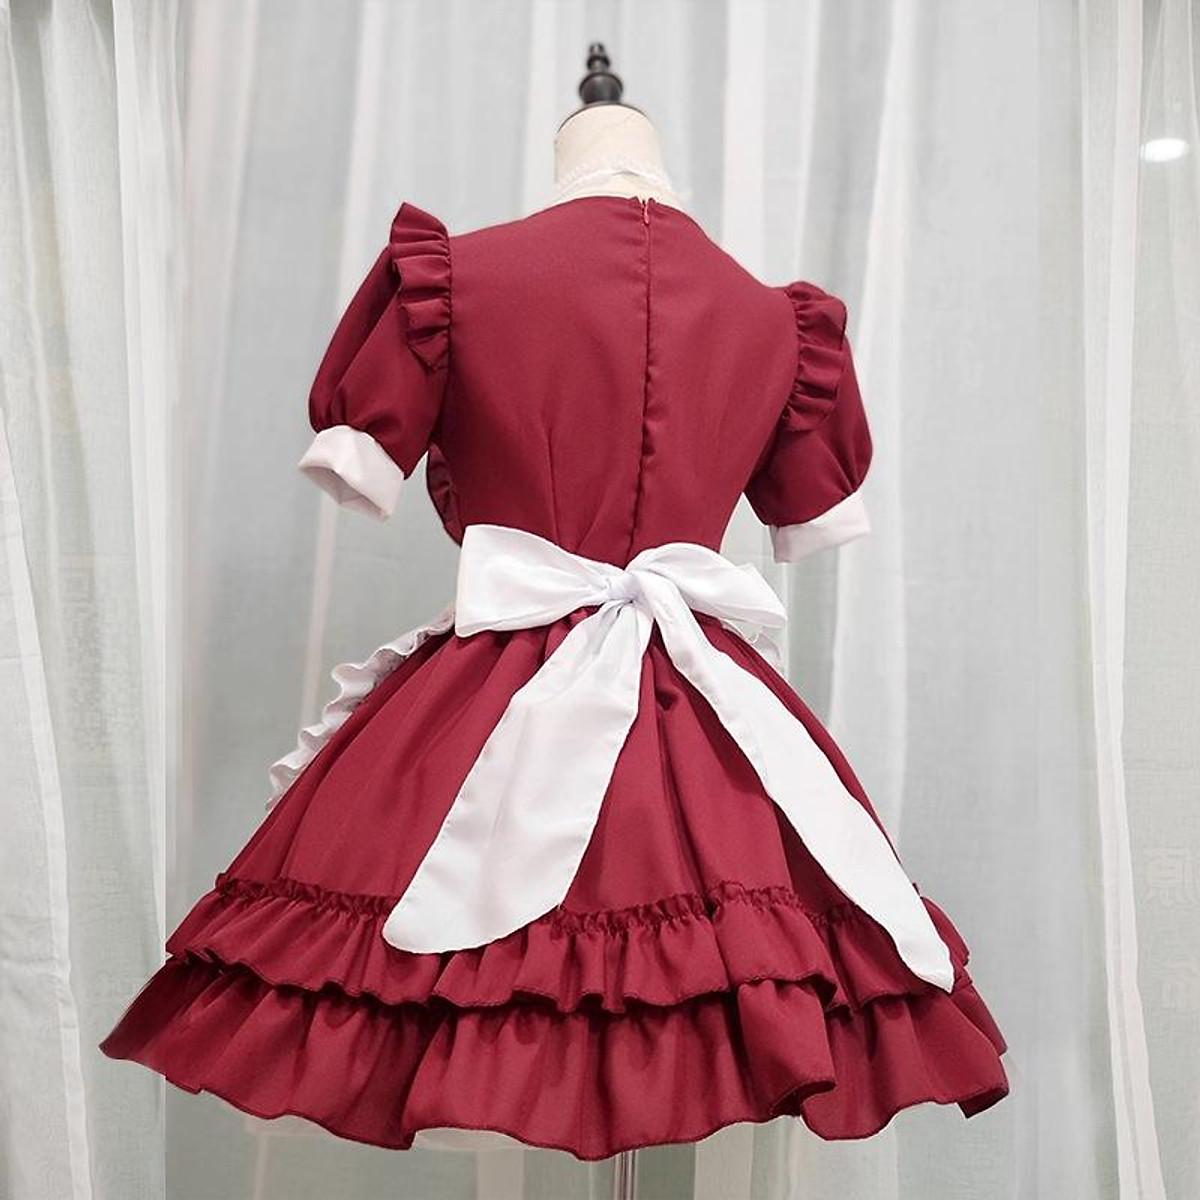 Japanese Maid Lolita Dress Cosplay Costume Anime Maid Outfit Women Sexy  Lingerie Sweet Cute Uniform Temptation